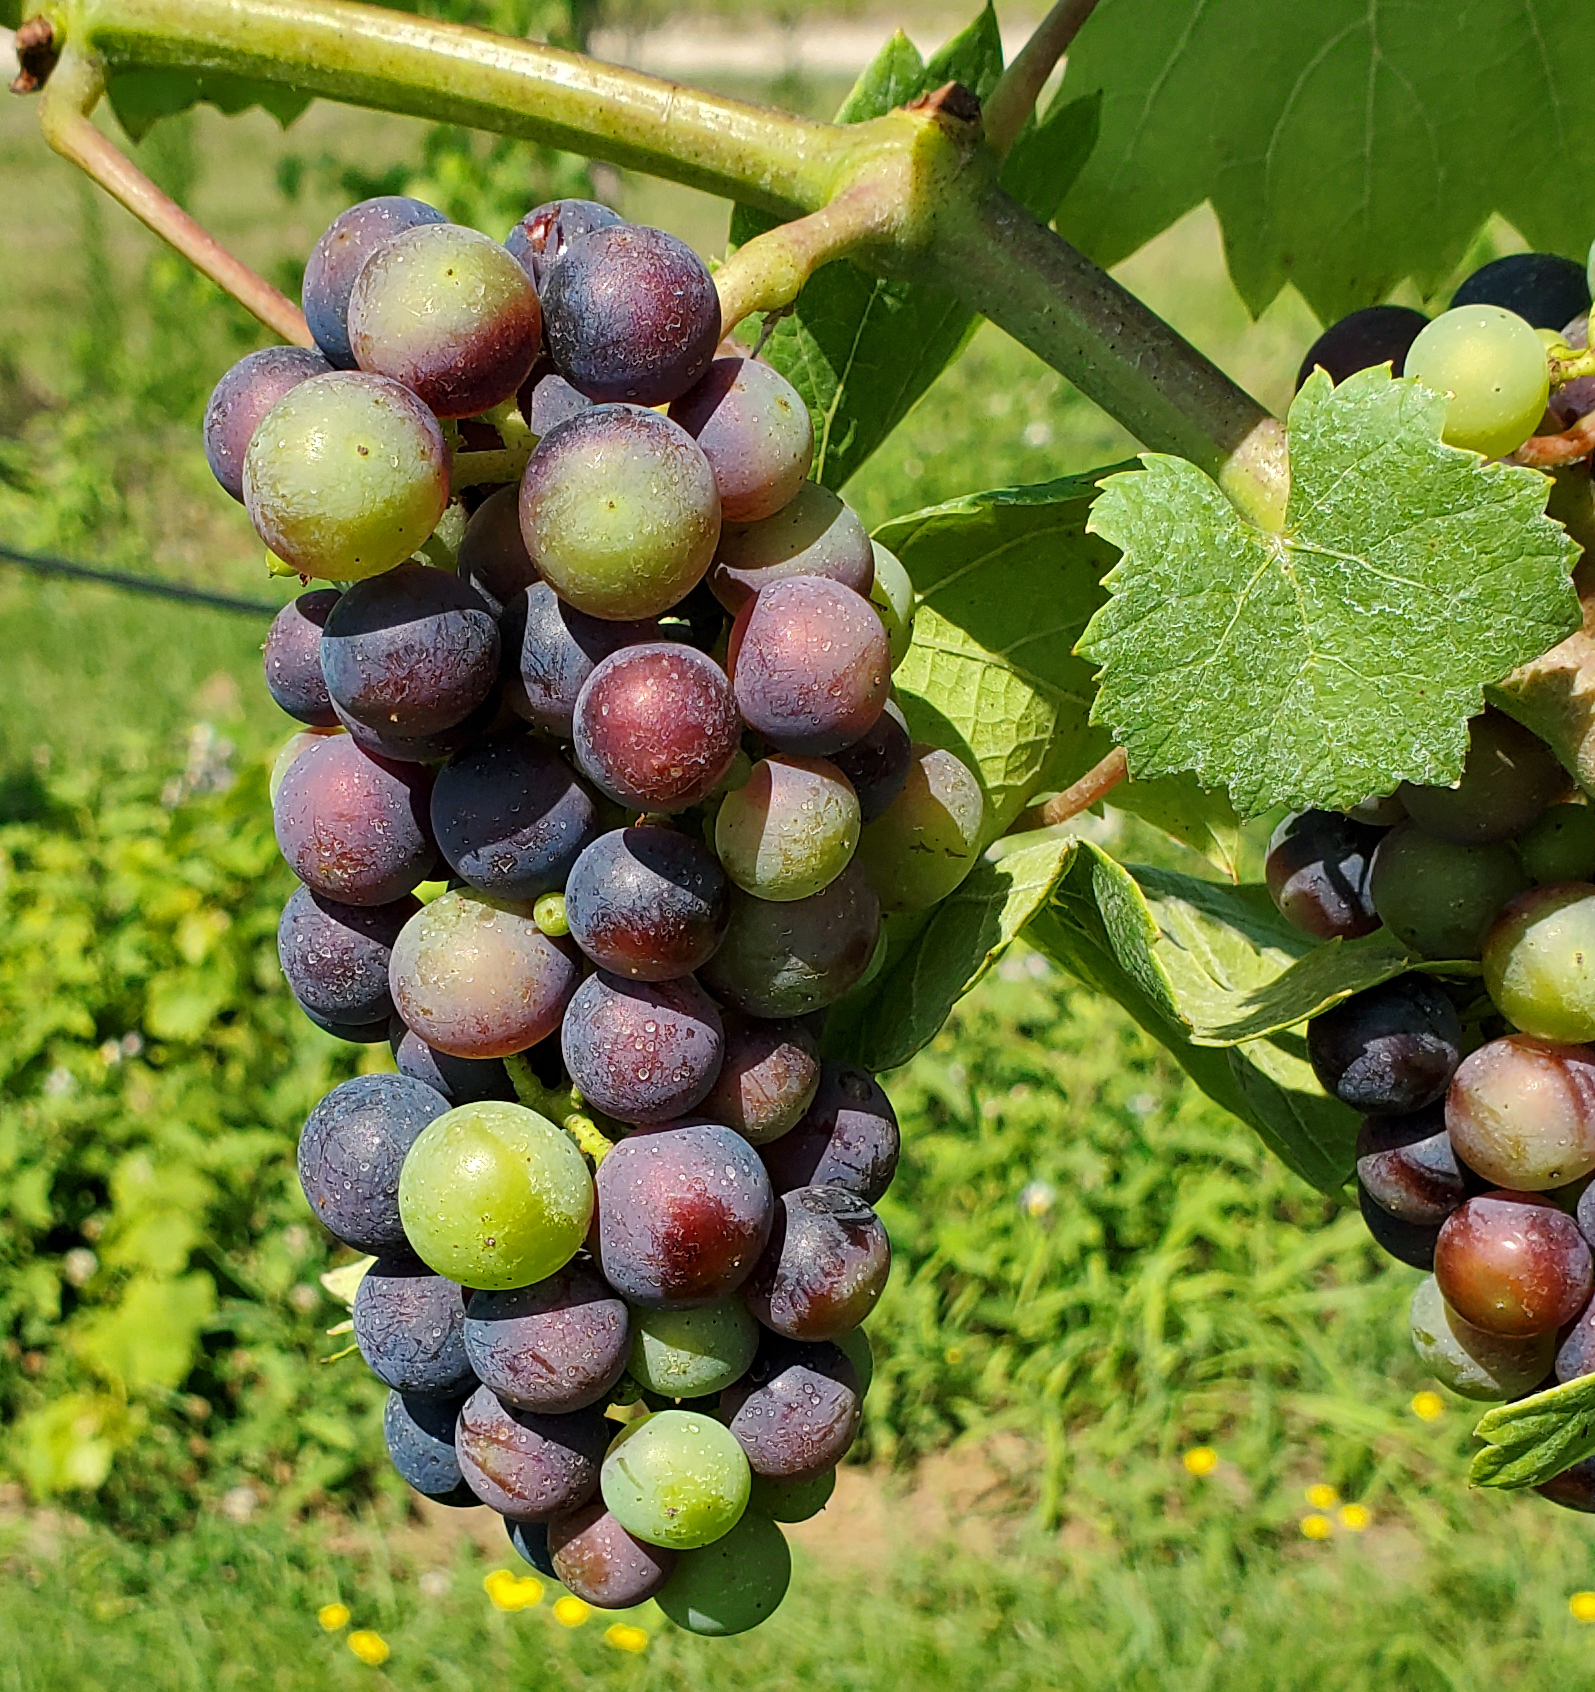 Grapes hanging from a tree.